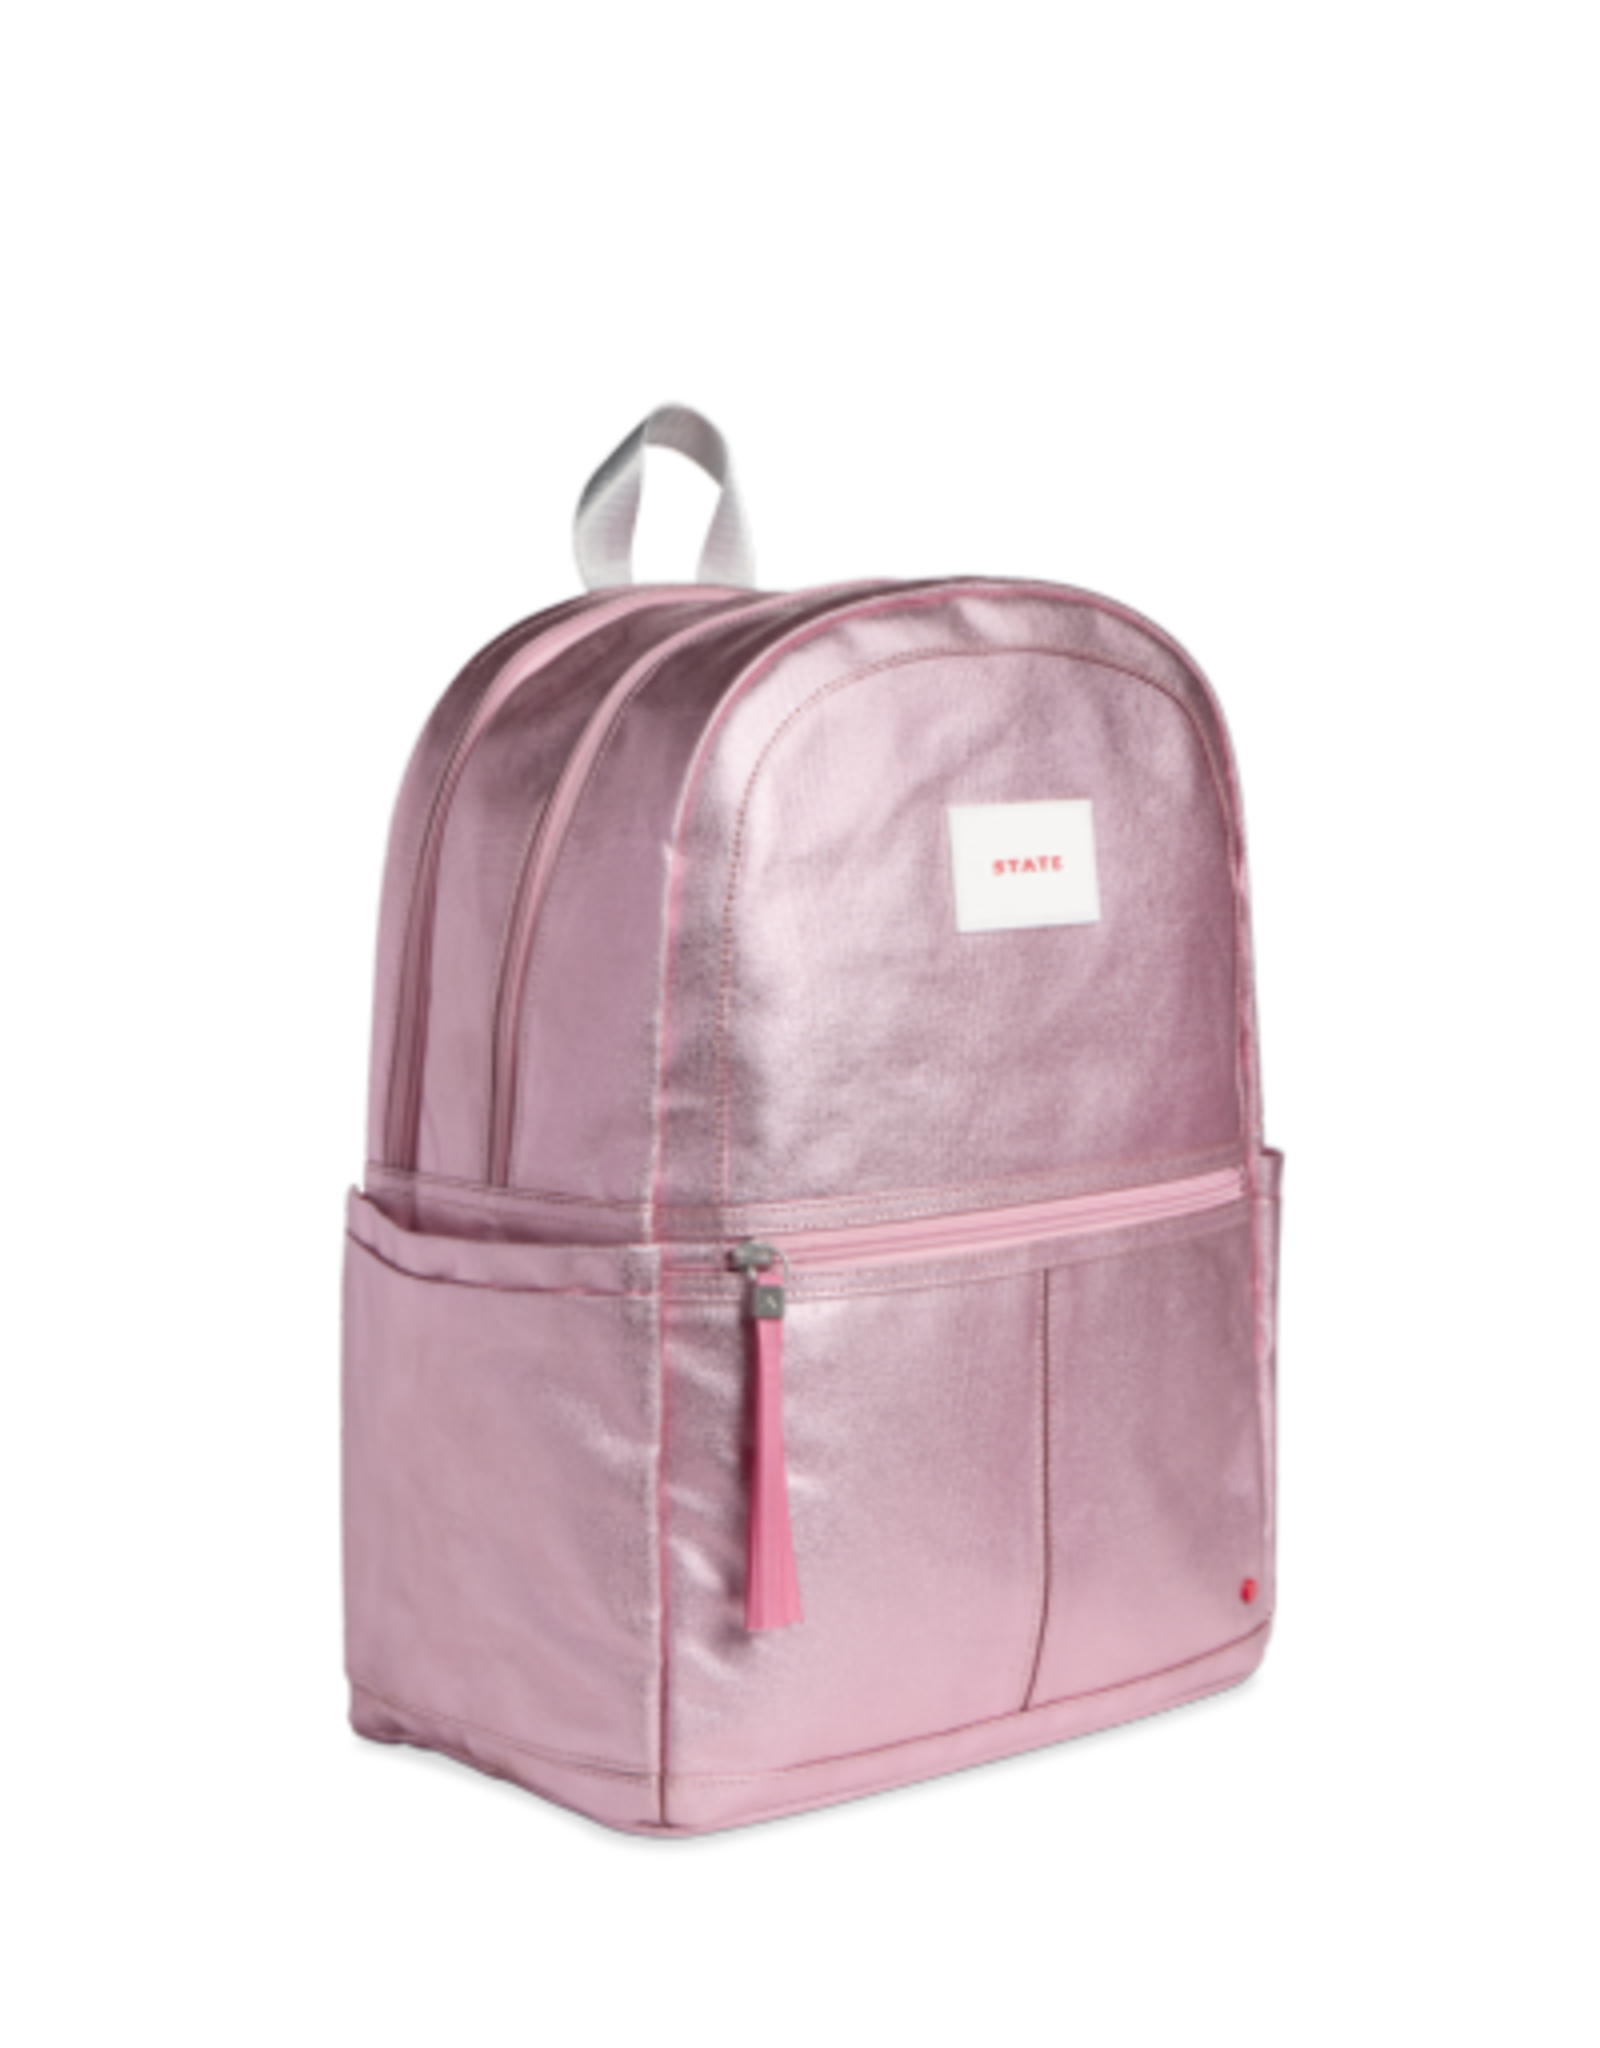 Recycled Double Pocket Backpack Medium in Rose Gold/Silver, Recycled Polyester by Quince